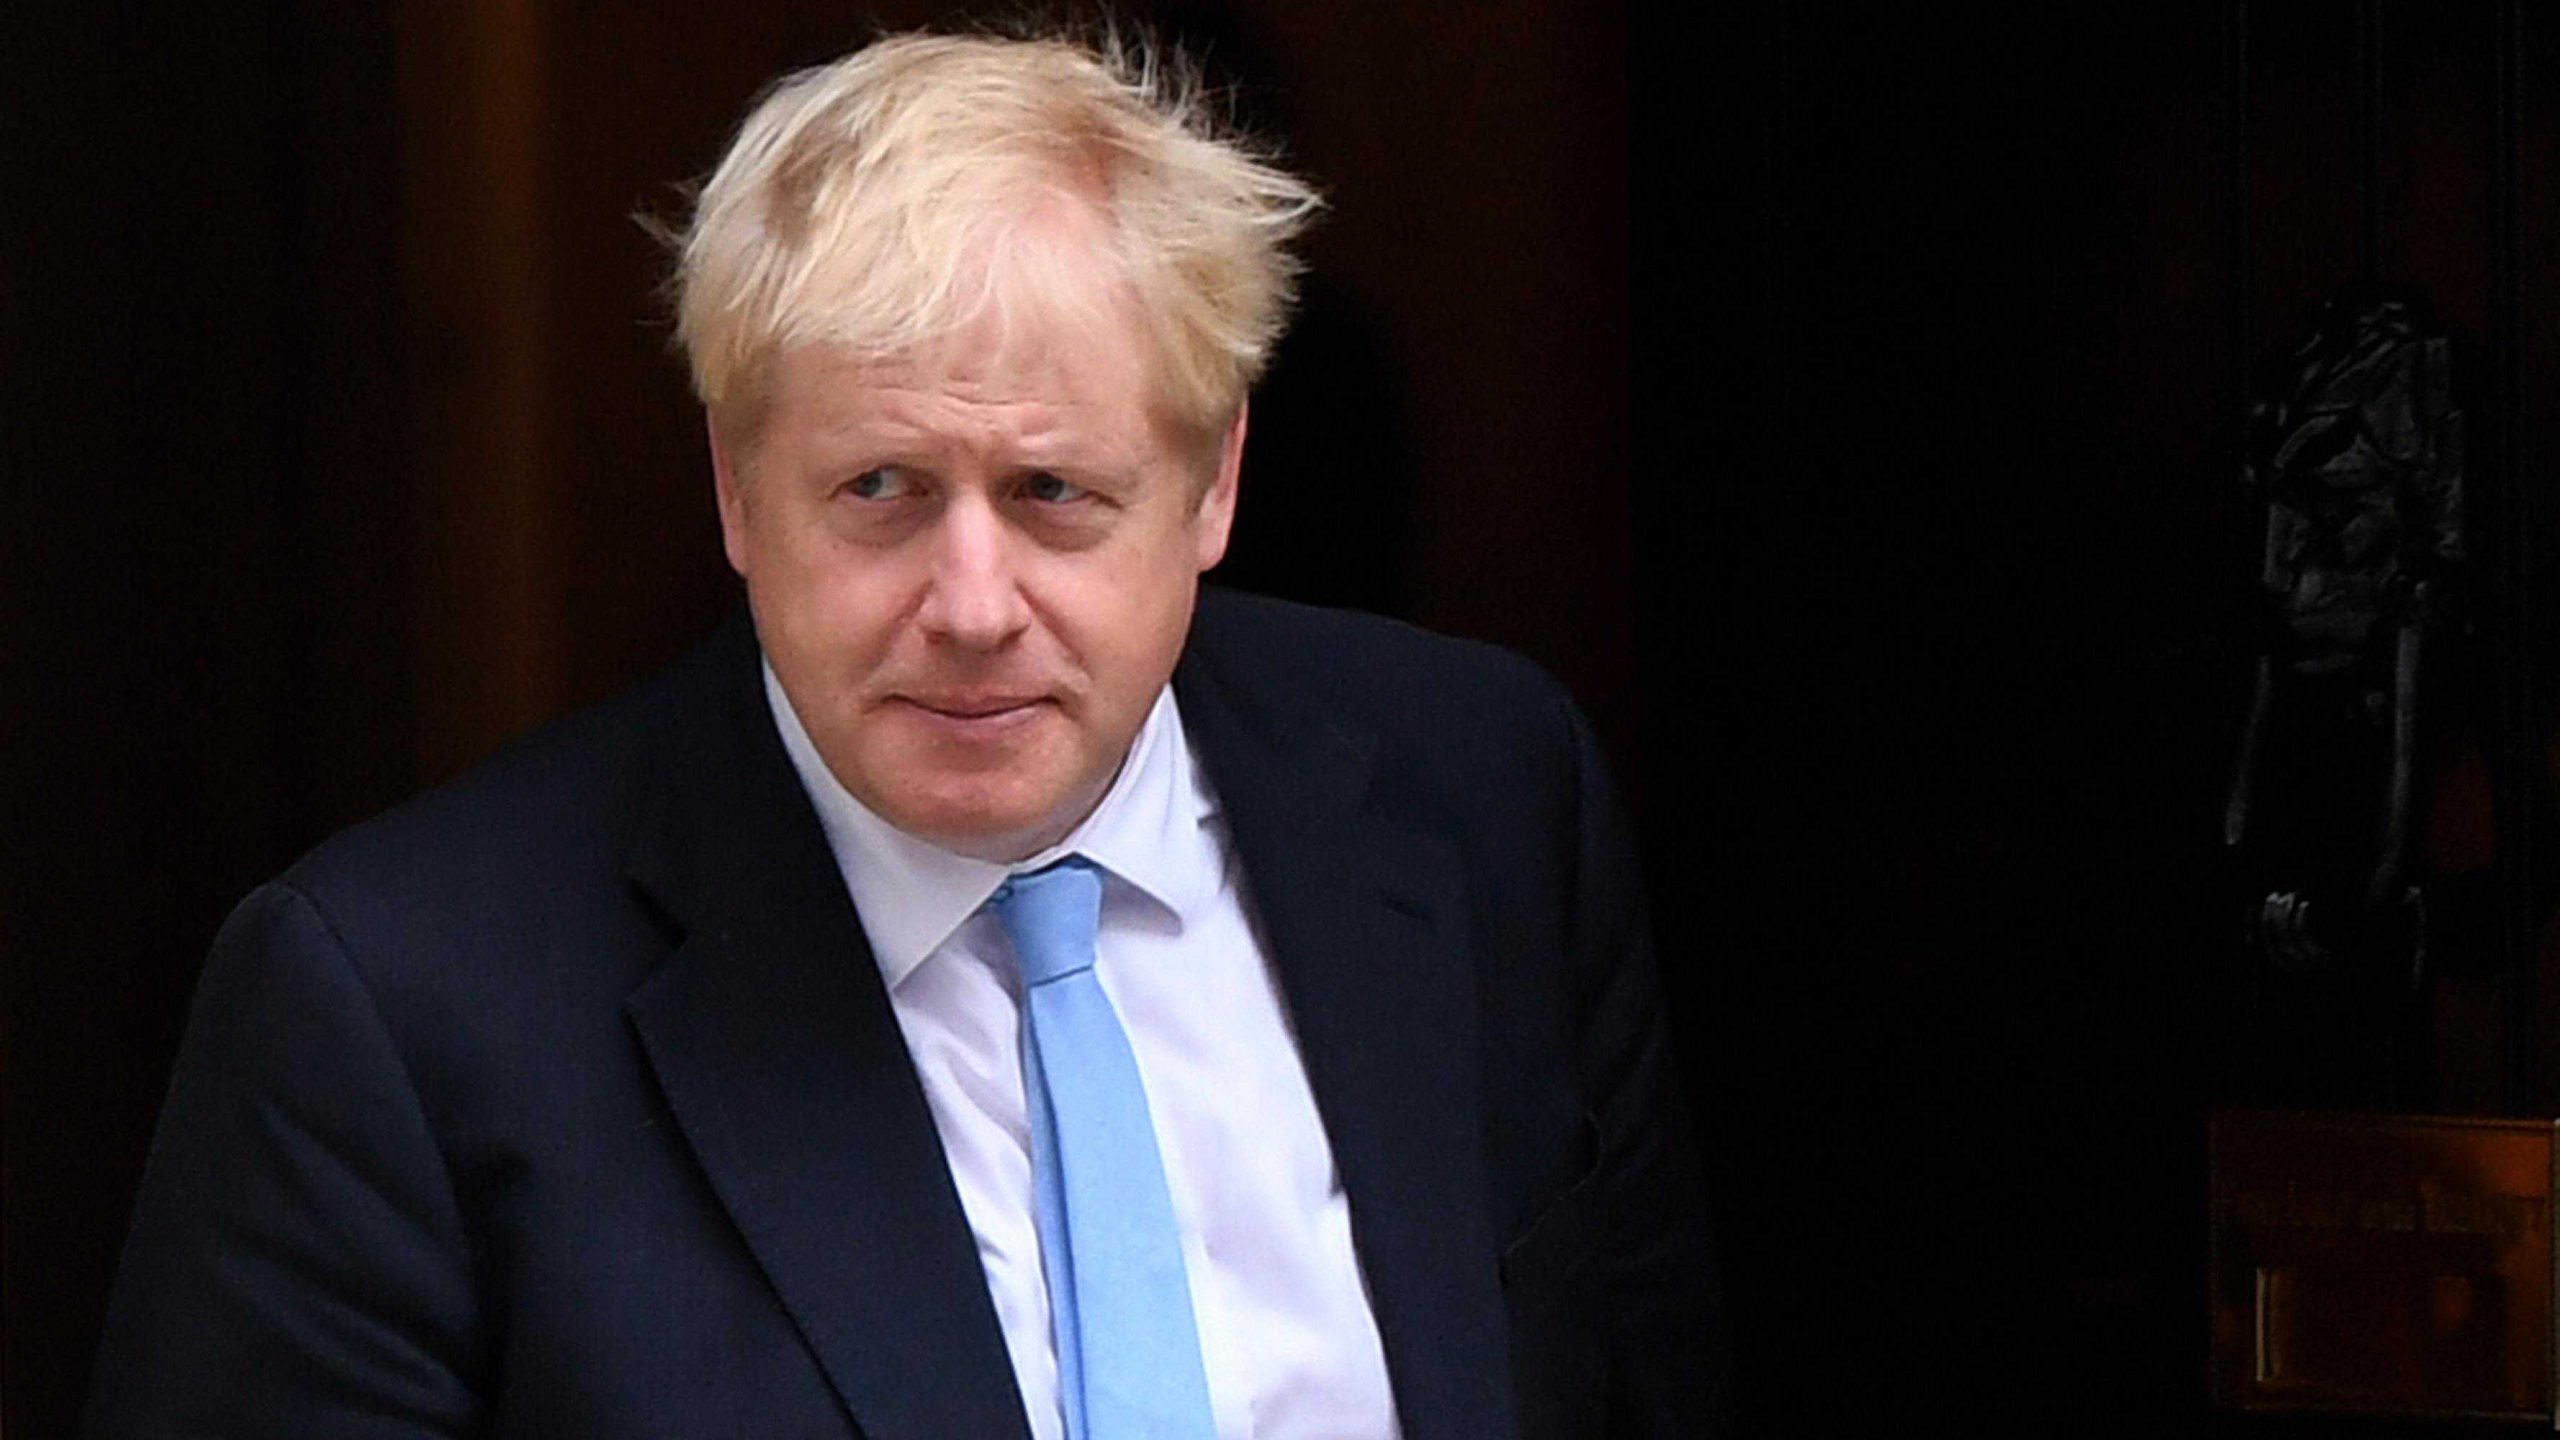 ERG MPs reveal how Johnson’s deal paves way for no deal Brexit next year